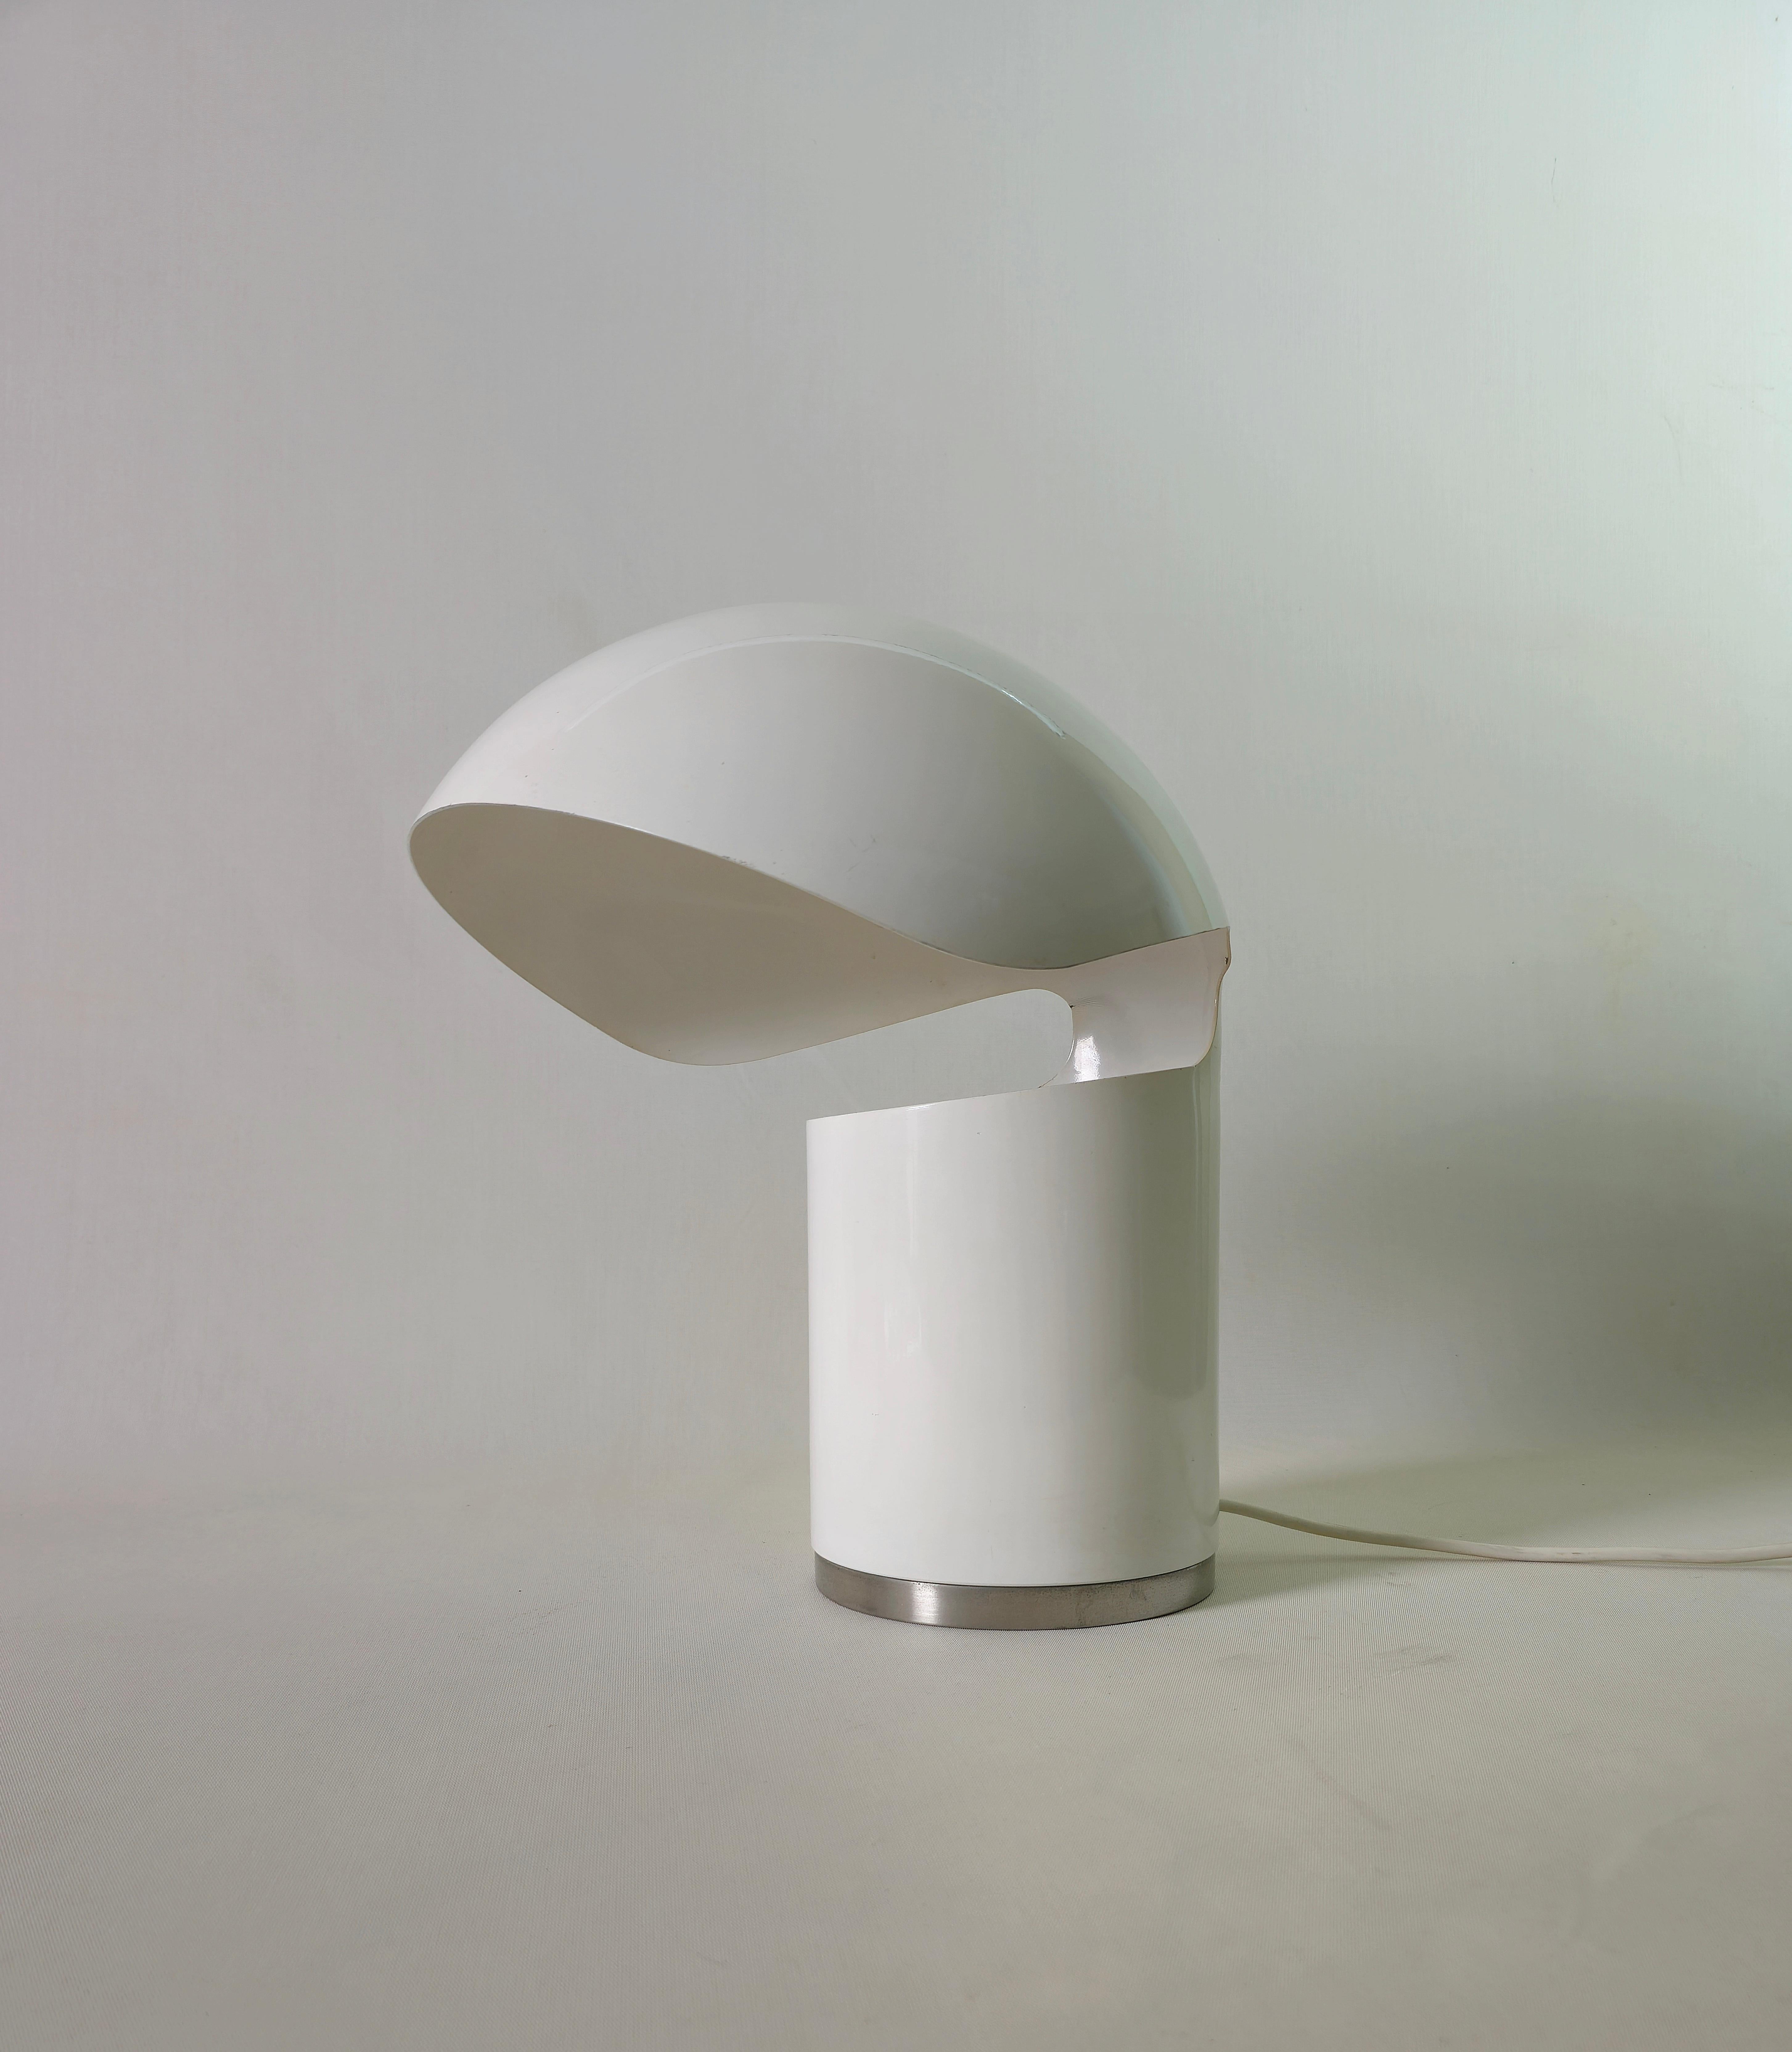 Italian Midcentury Design Table Lamp by Franco Buzzi for Francesconi  In Metal Itali 60s For Sale